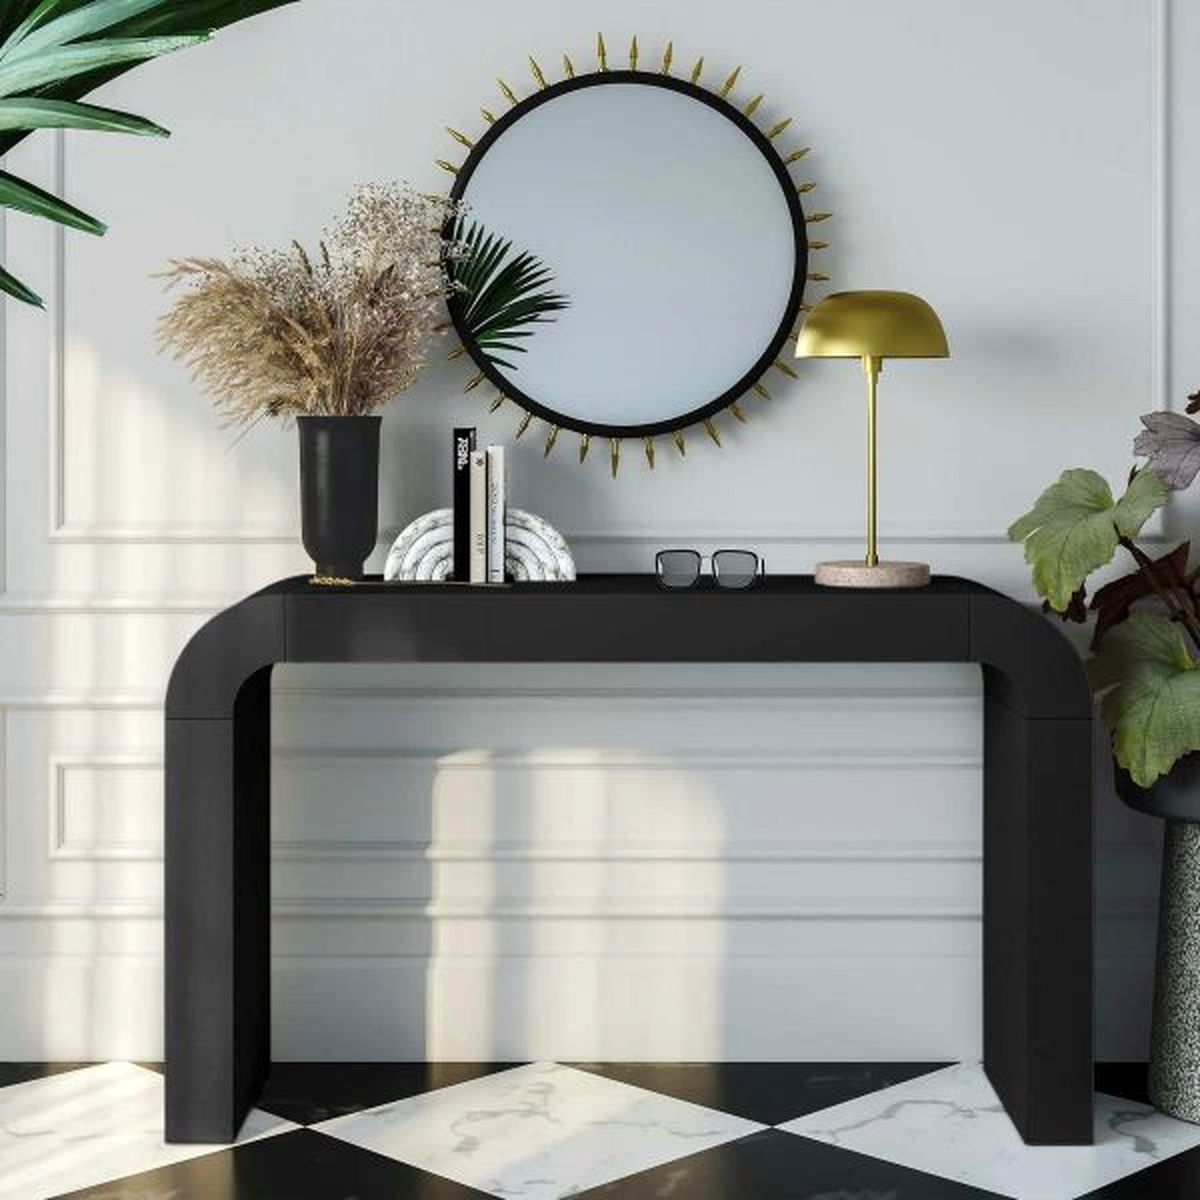 hump-black-console-table-with-waterfall-edges-modern-consoles-for-living-room-entryway-beautiful-minimalistic-accent-furniture-clean-lines-geometric-shape-minimalist-decor-600x600